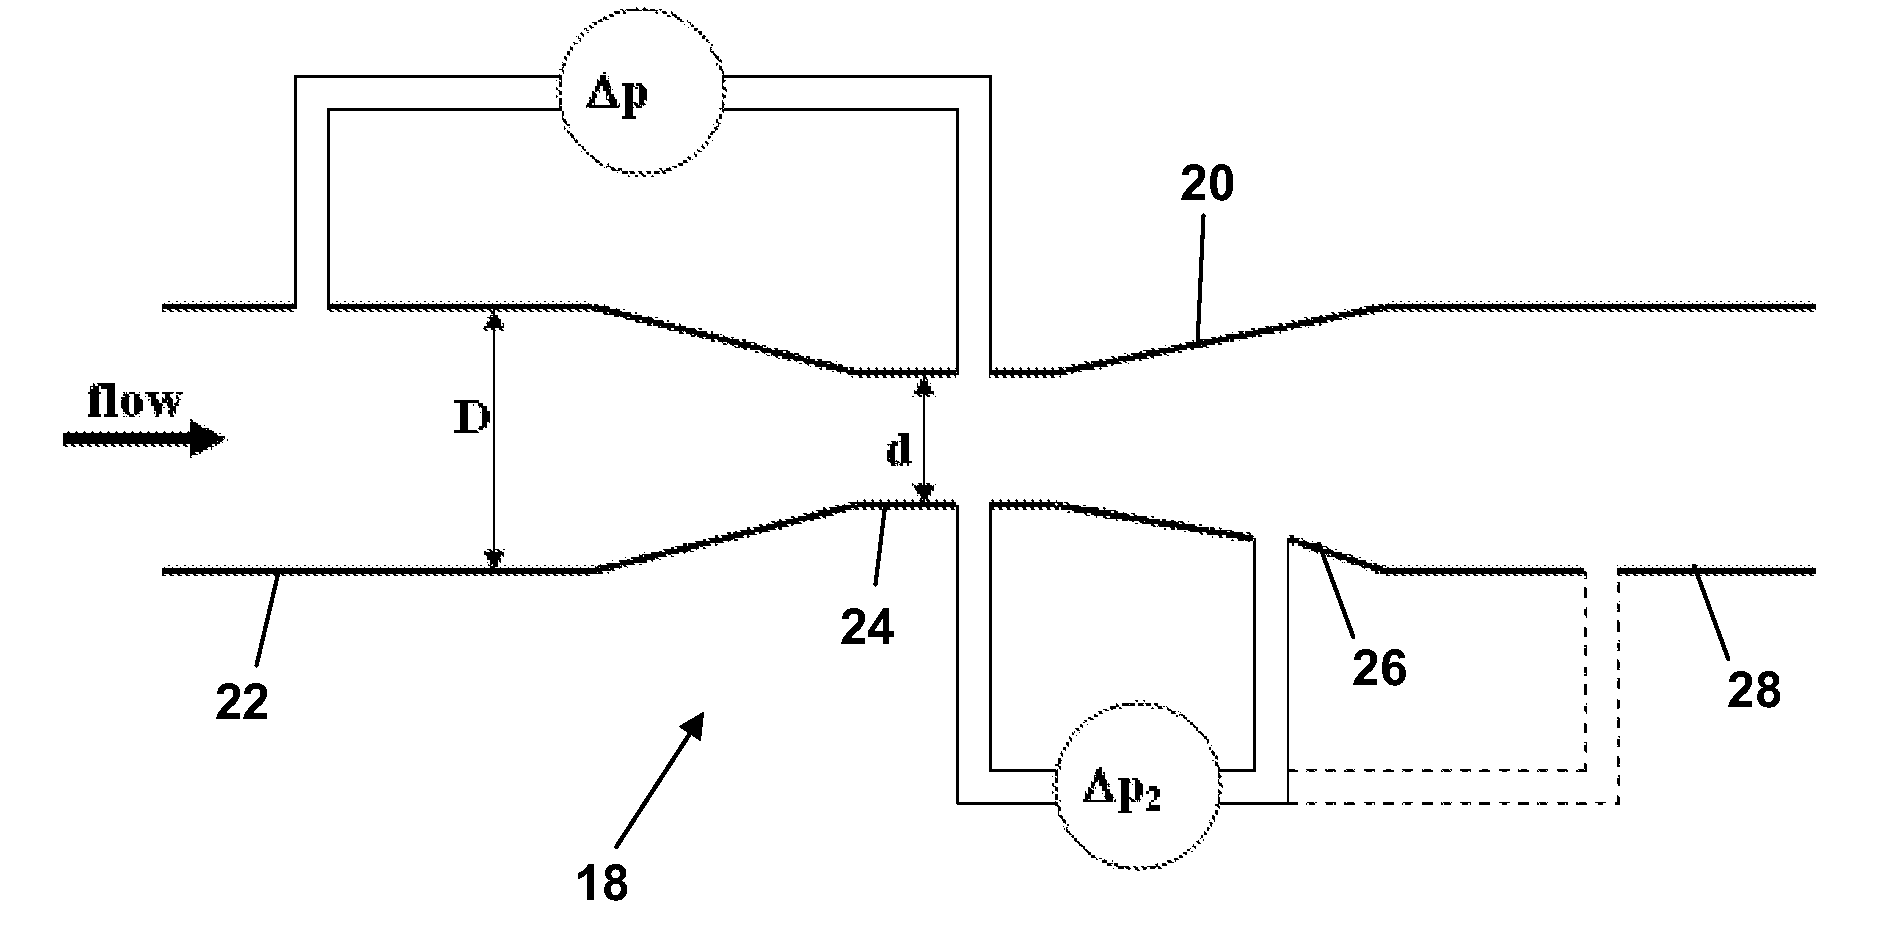 Apparatus and a method of measuring the flow of a fluid